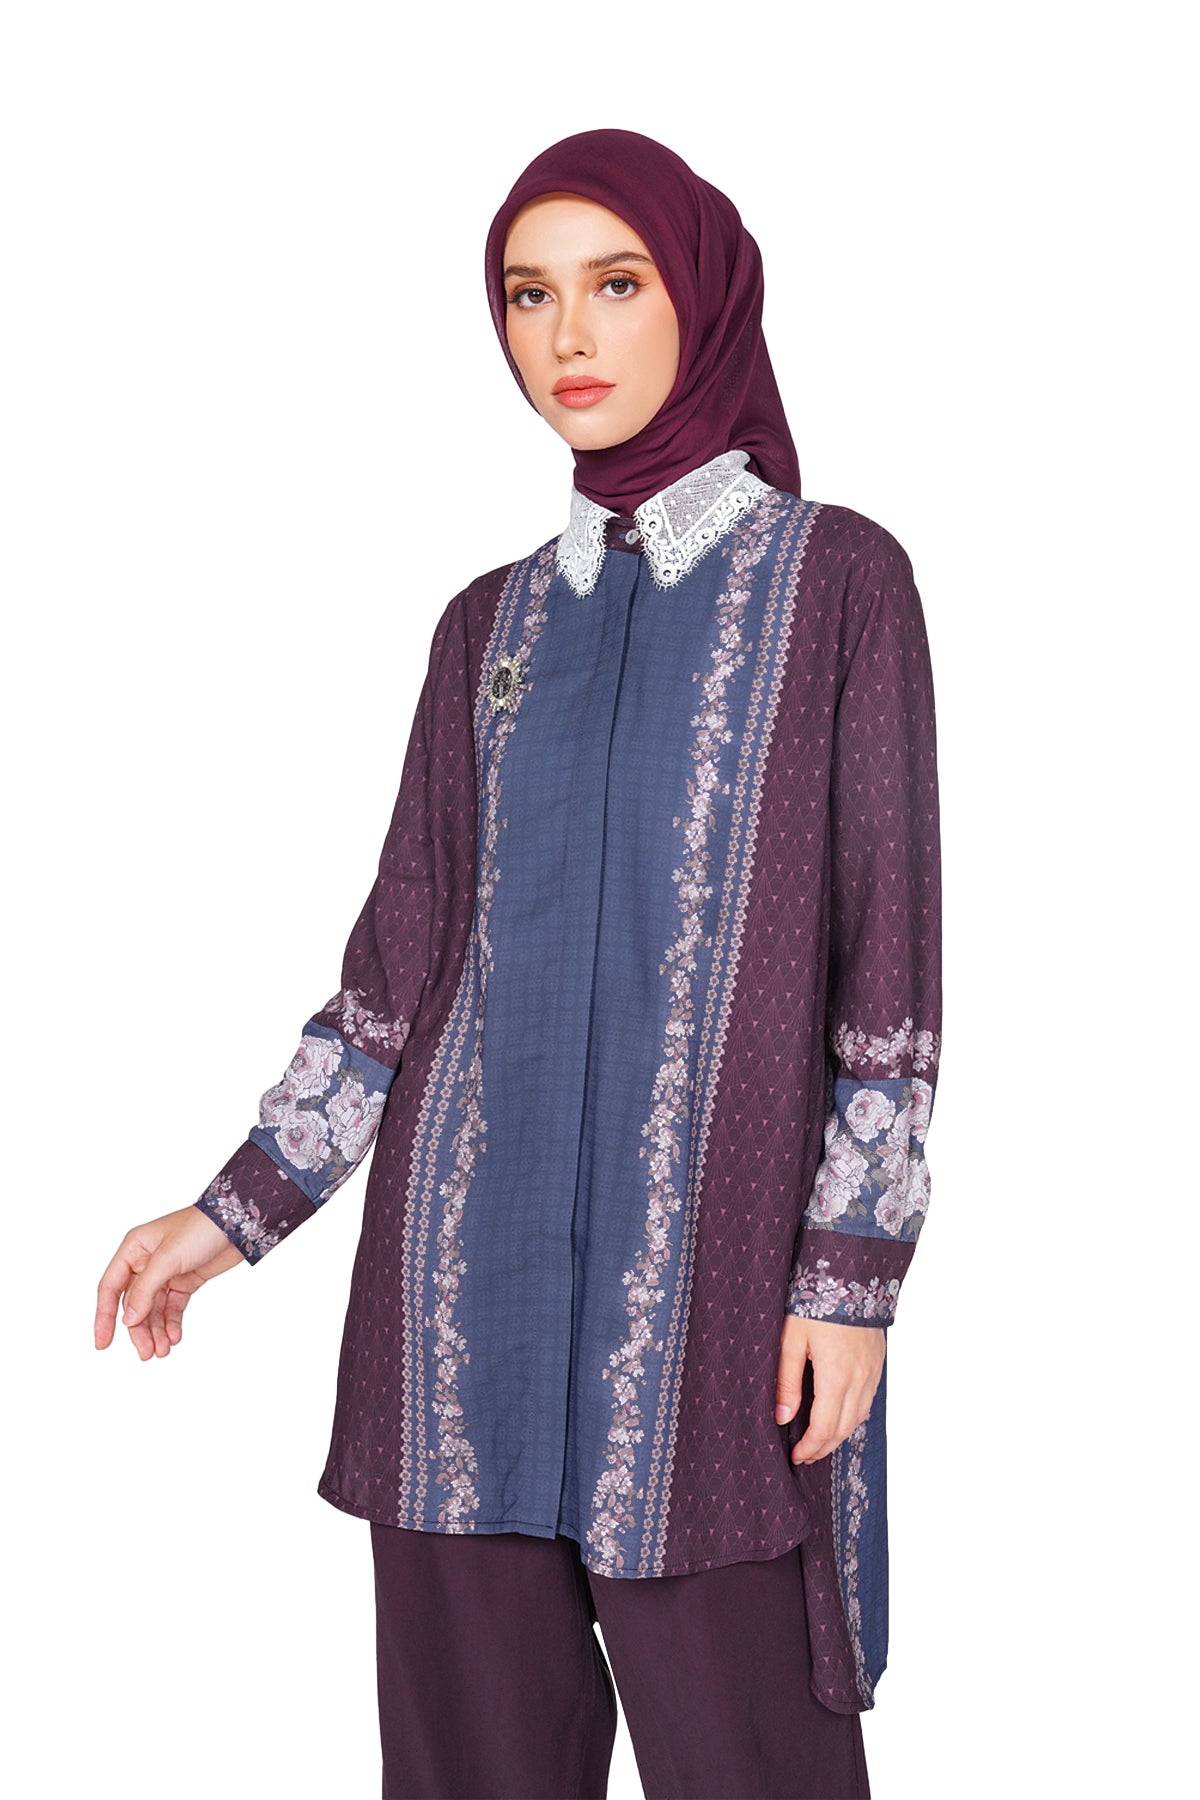 The Story Book Lace Collar Shirt - Maroon